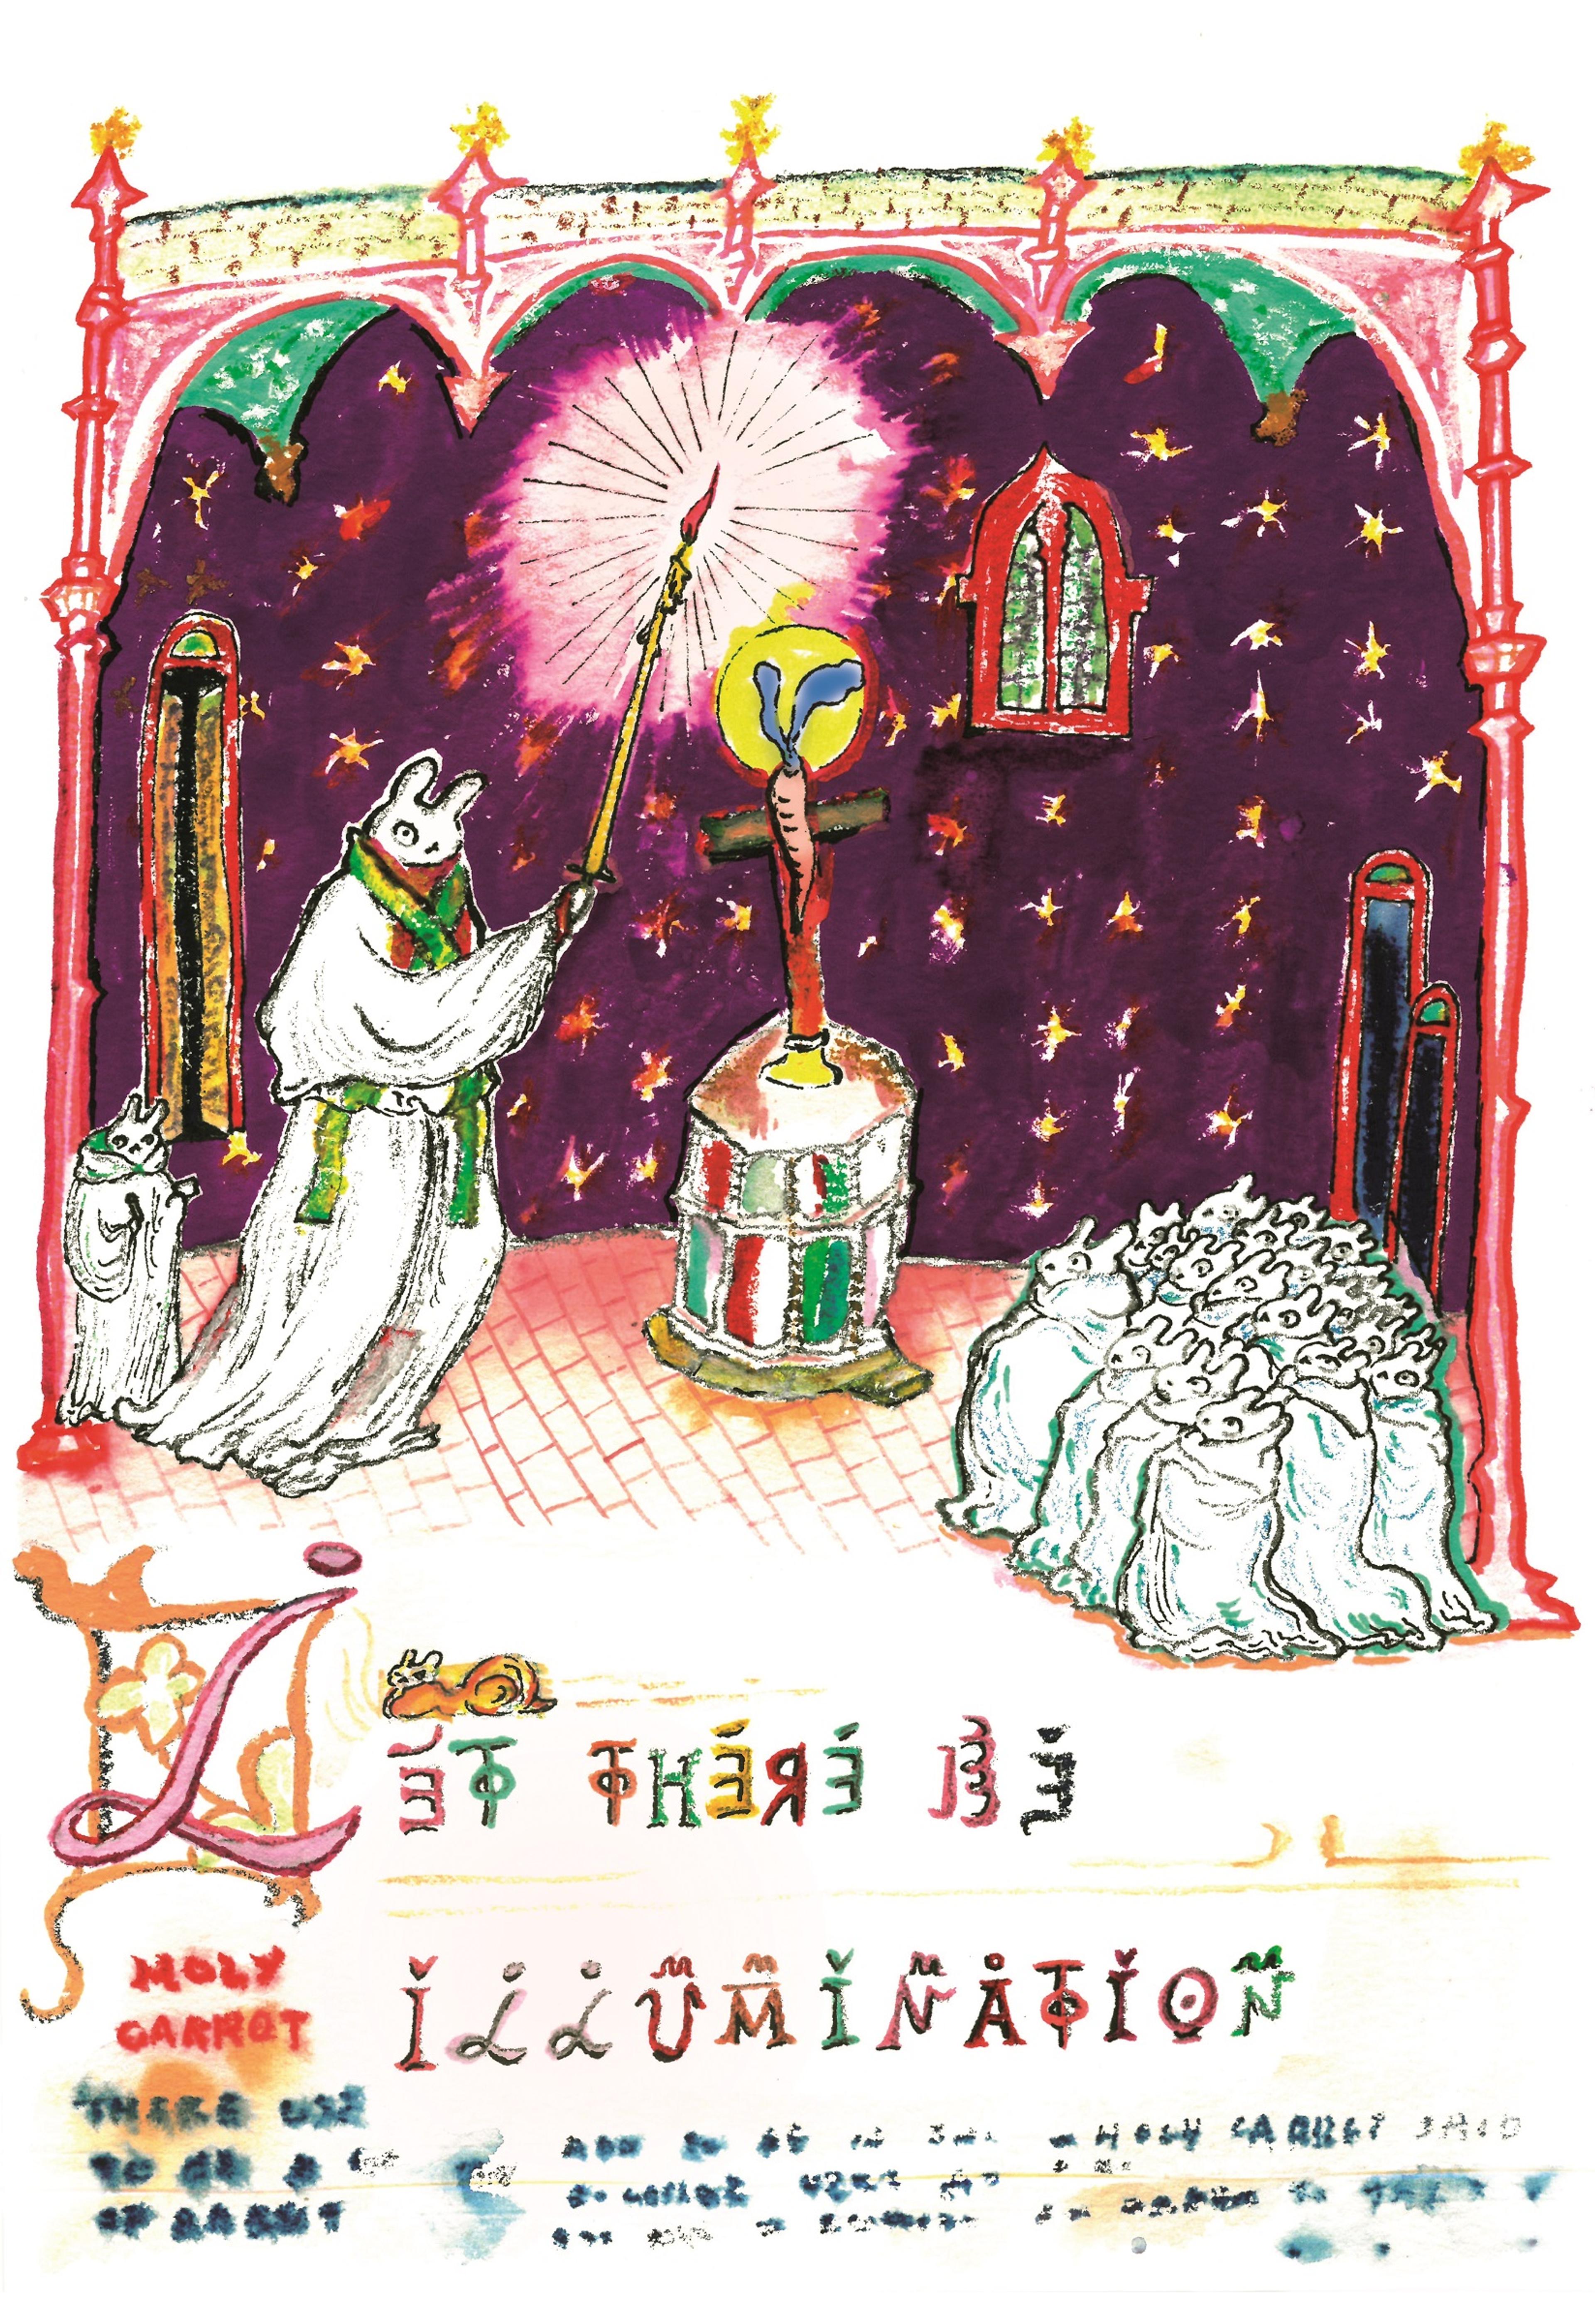 Illustration of rabbits in vestments watching a candle be illuminated